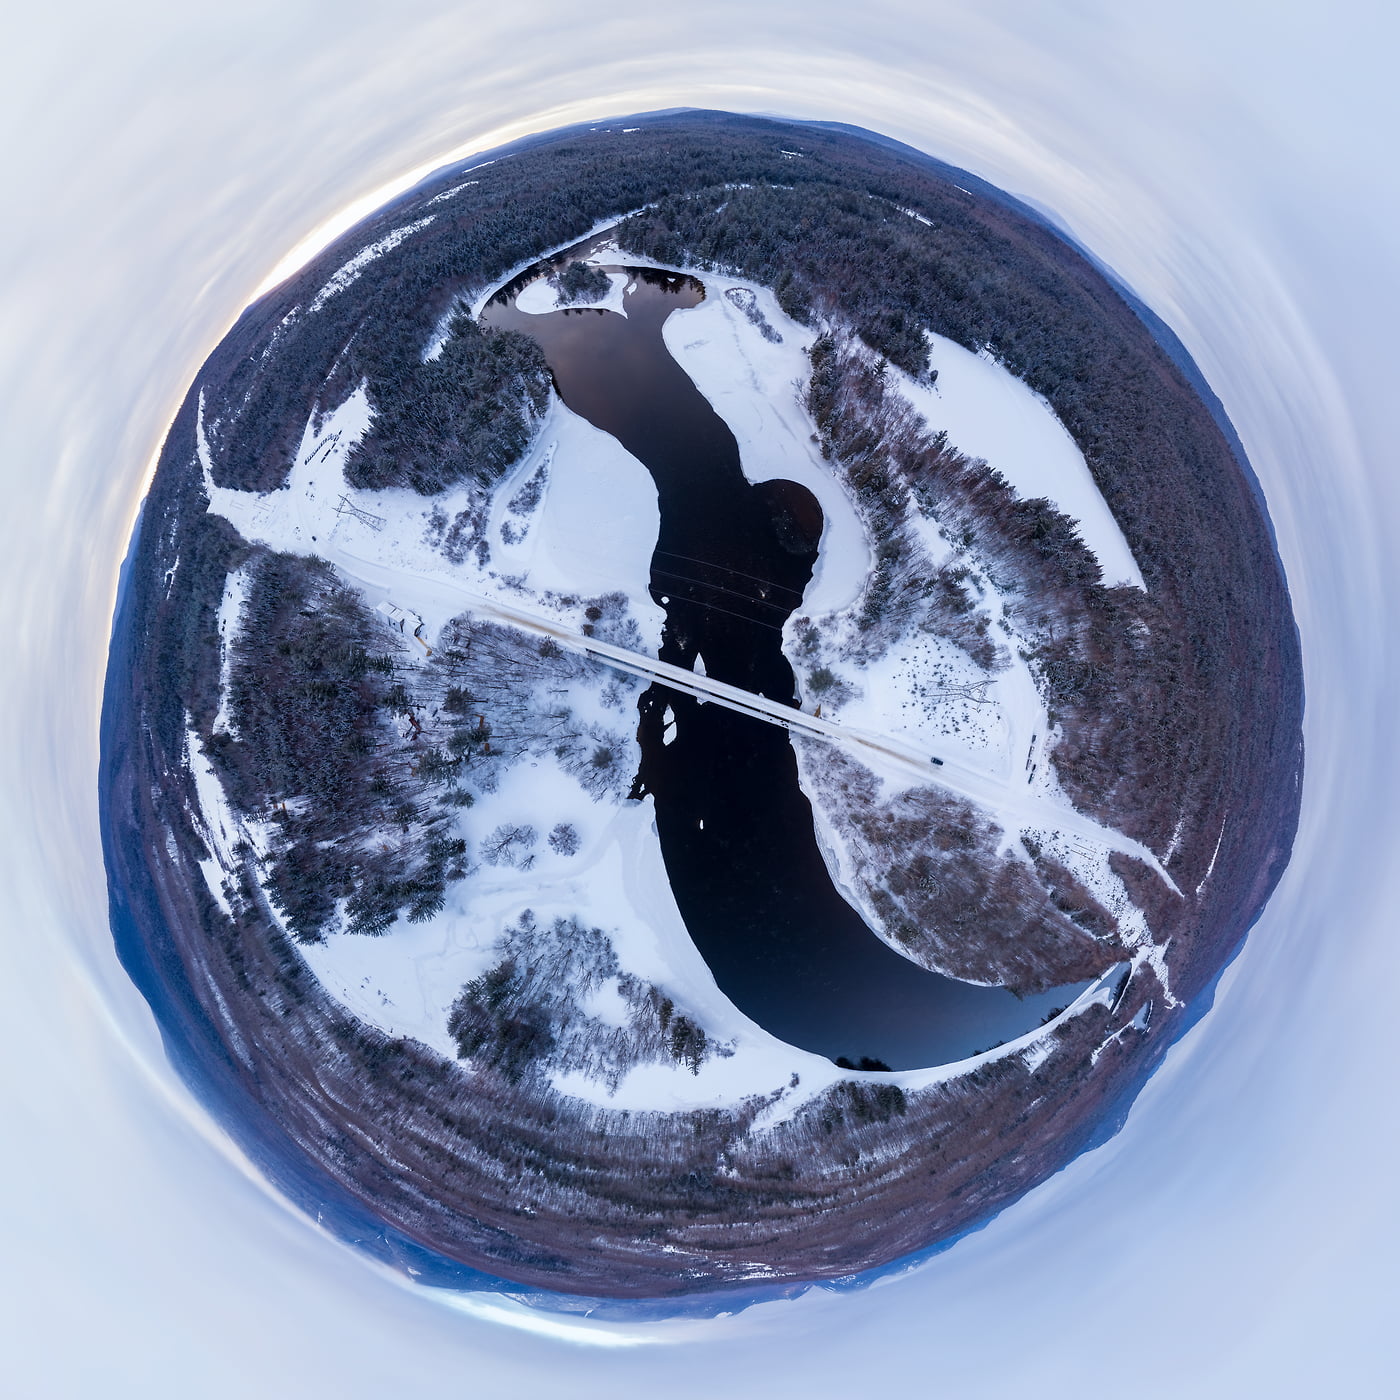 303 megapixels! A very high resolution, large-format VAST photo of Abol Bridge in Millinocket, Maine in winter with snow; fine art aerial 360-degree panorama photograph created by Aaron Priest in New England